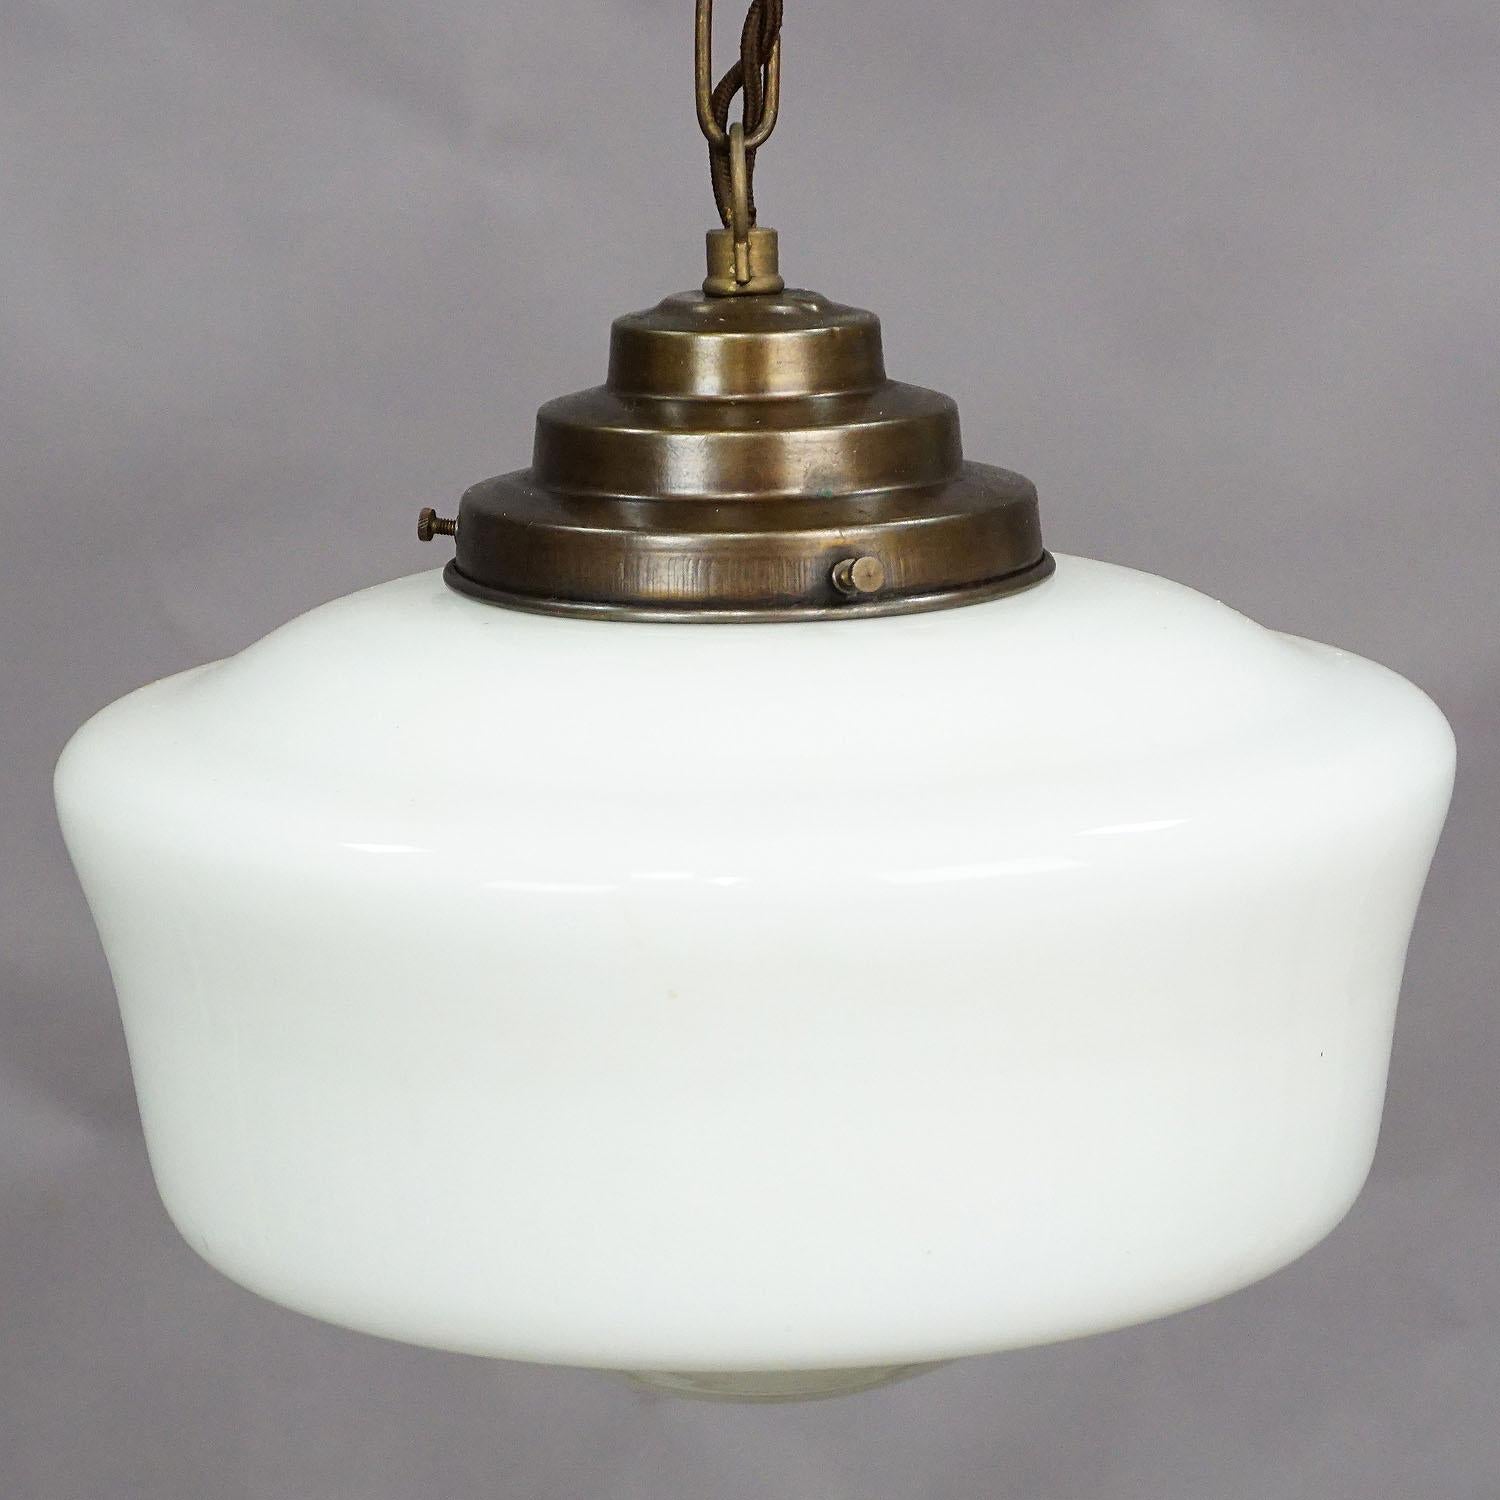 An antique functionalistic Art Deco pendant lamp with a white opaline glass shade and brass suspension. Cabling renewed, working order. With international E27 base lamp holder.

Measures: height 26.38